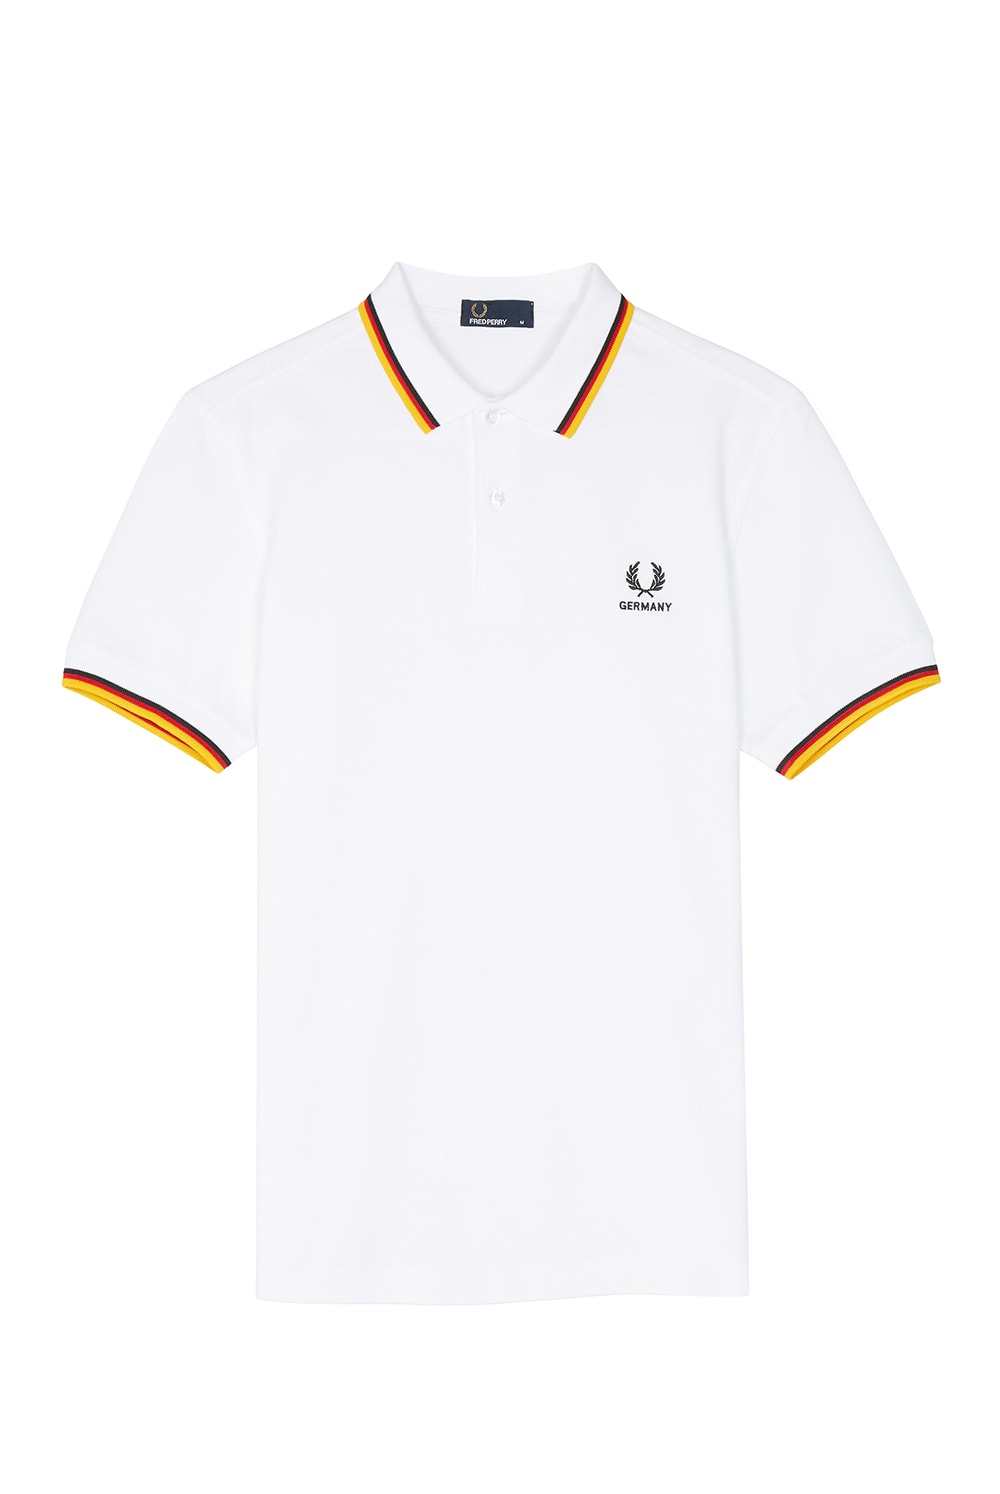 Fred Perry FIFA World Cup Country Shirts collection polo soccer Russia England Brazil Belgium France Germany Spain Portugal Sweden Japan South Korea